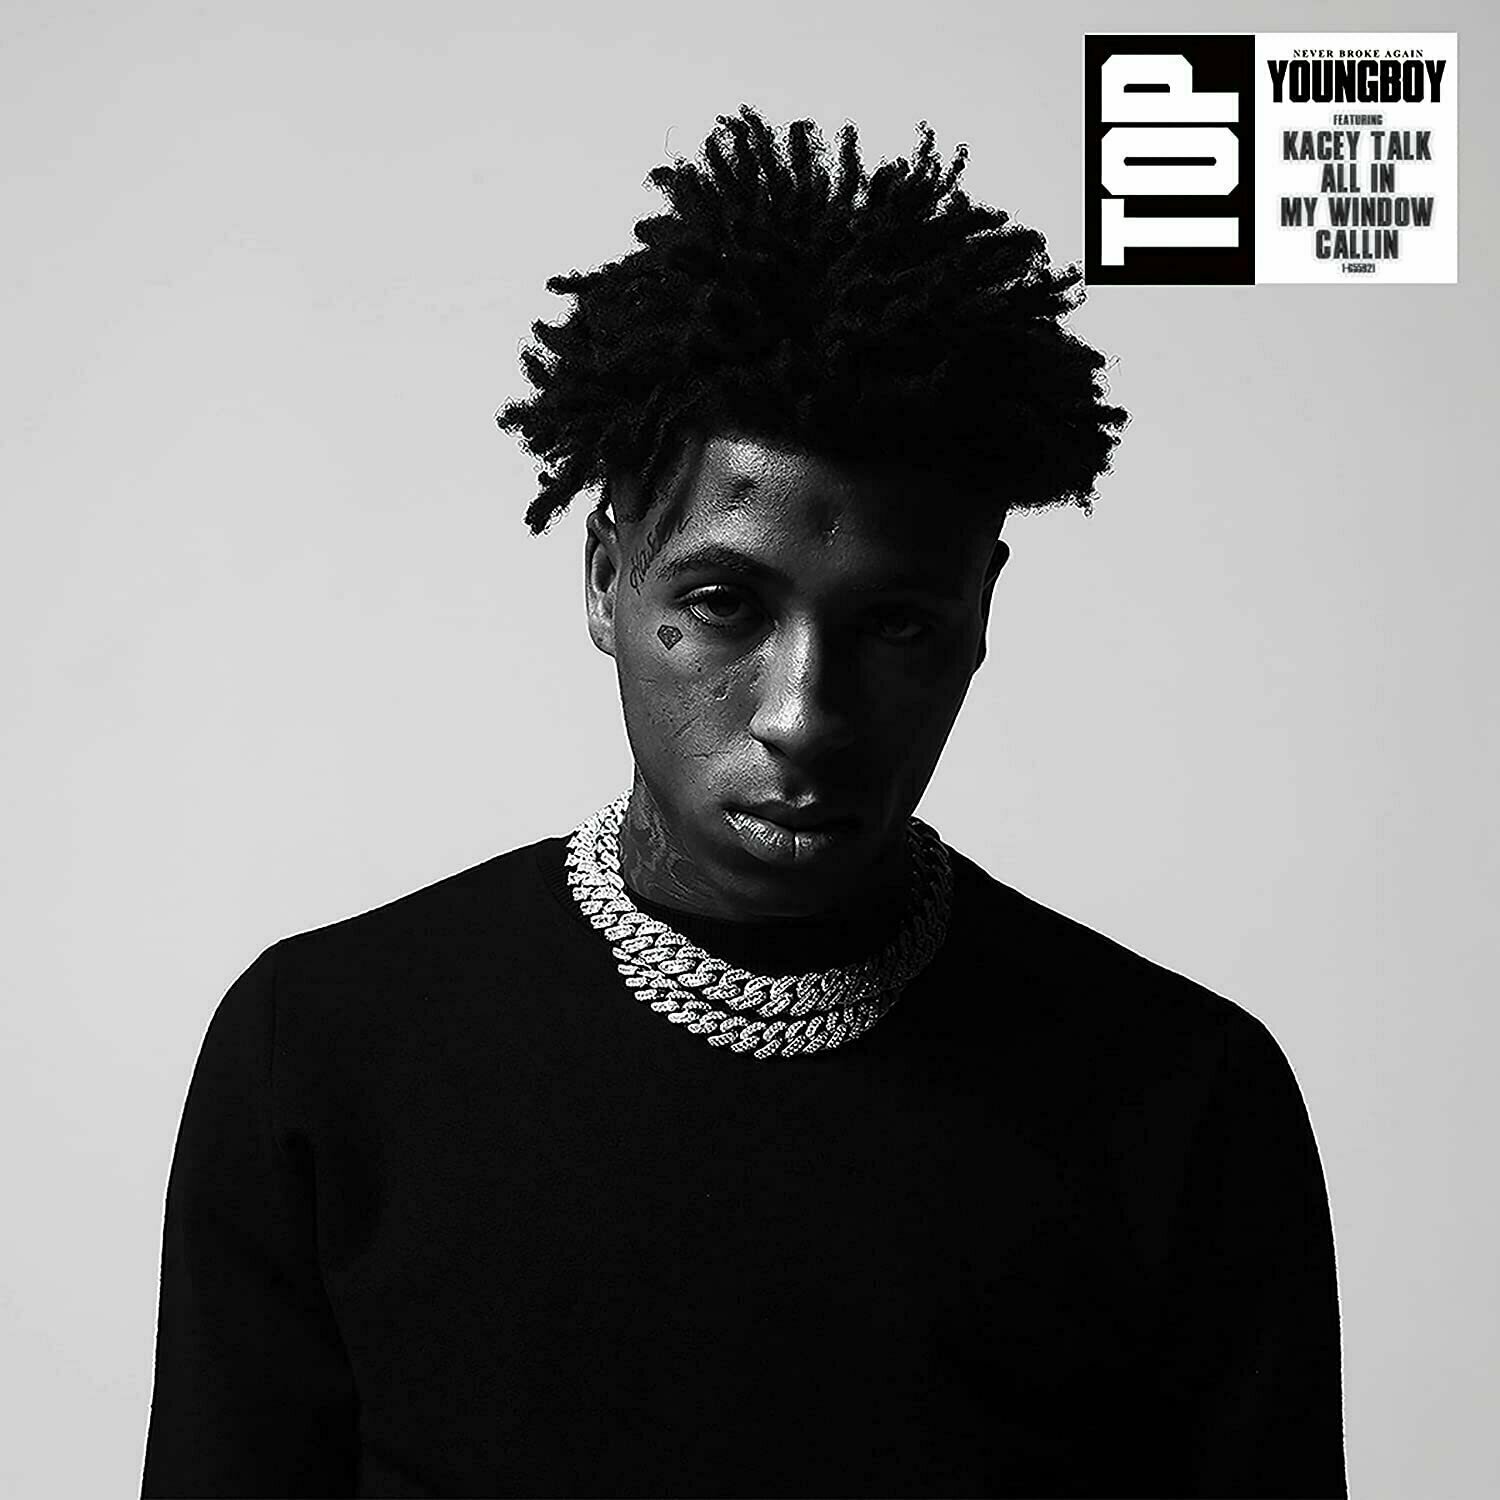 Youngboy Never Broke Again - Top (2 LP) Youngboy Never Broke Again